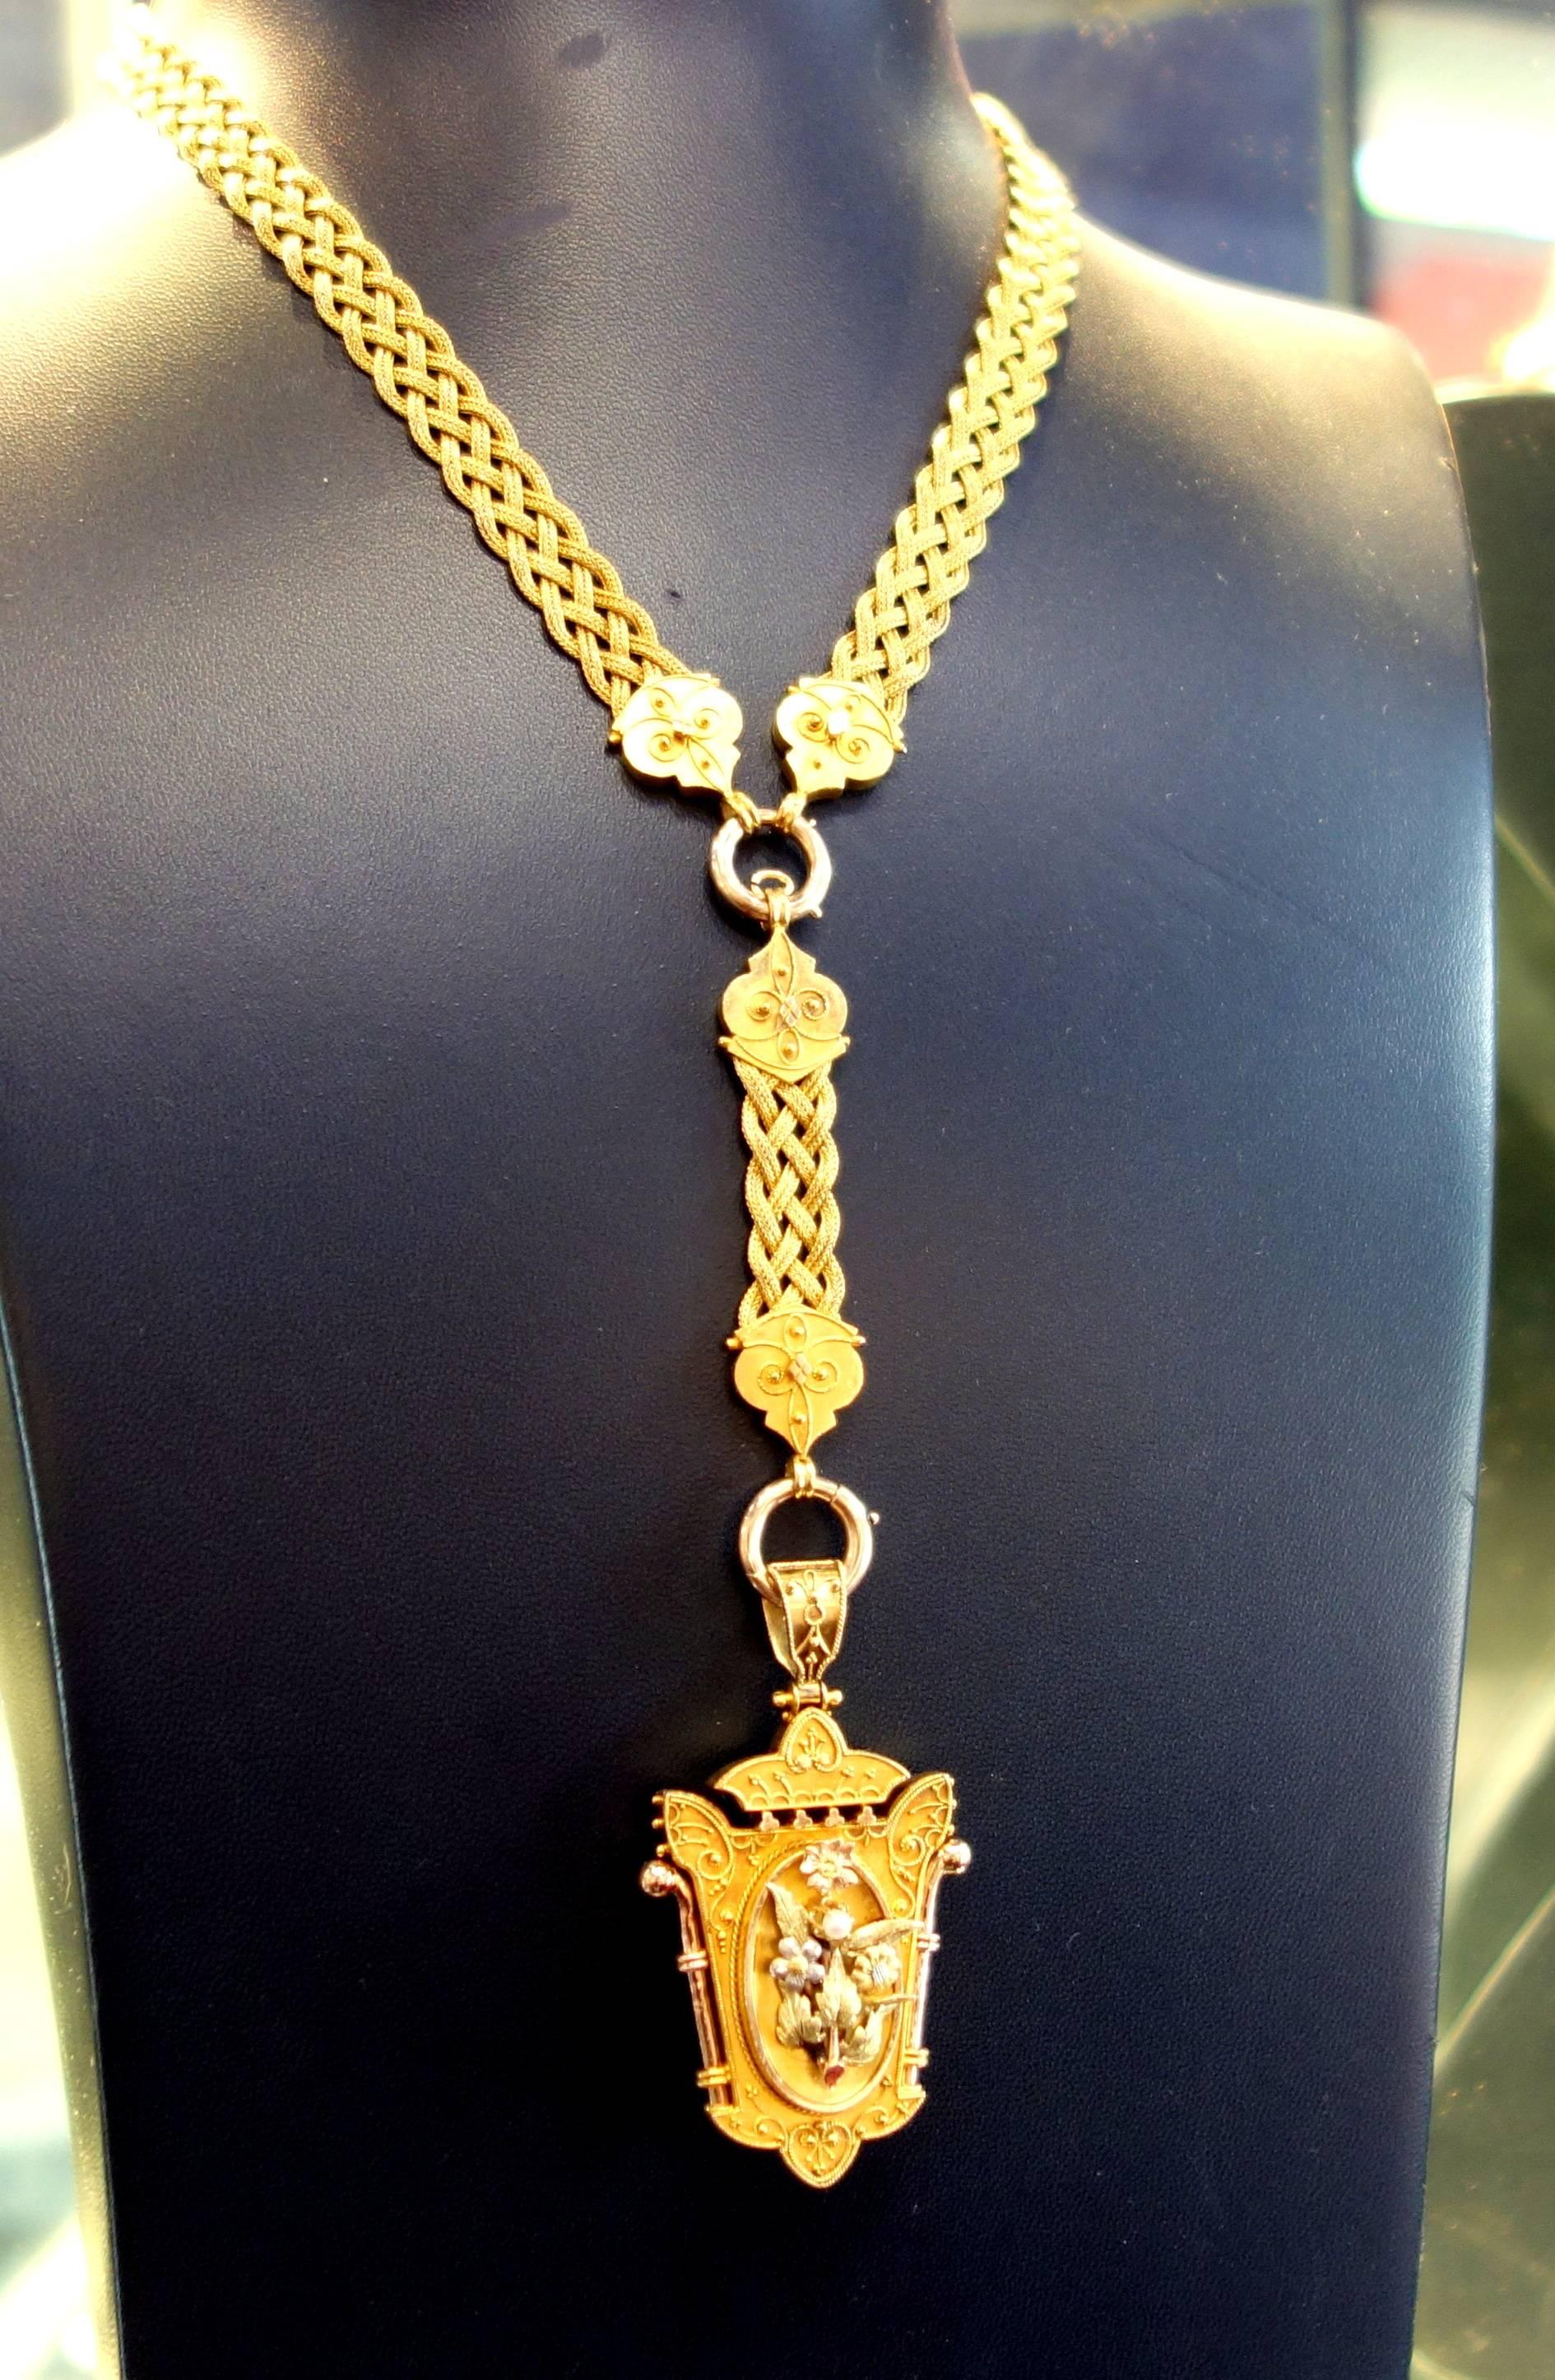 Mid 19th Century braided 14K gold necklace suspends thee original matching locket/hair receiver.  The braided necklace can be worn at its longest length of 21 inches or one can remove the pendant element and wear it shorter at about 18 inches.    